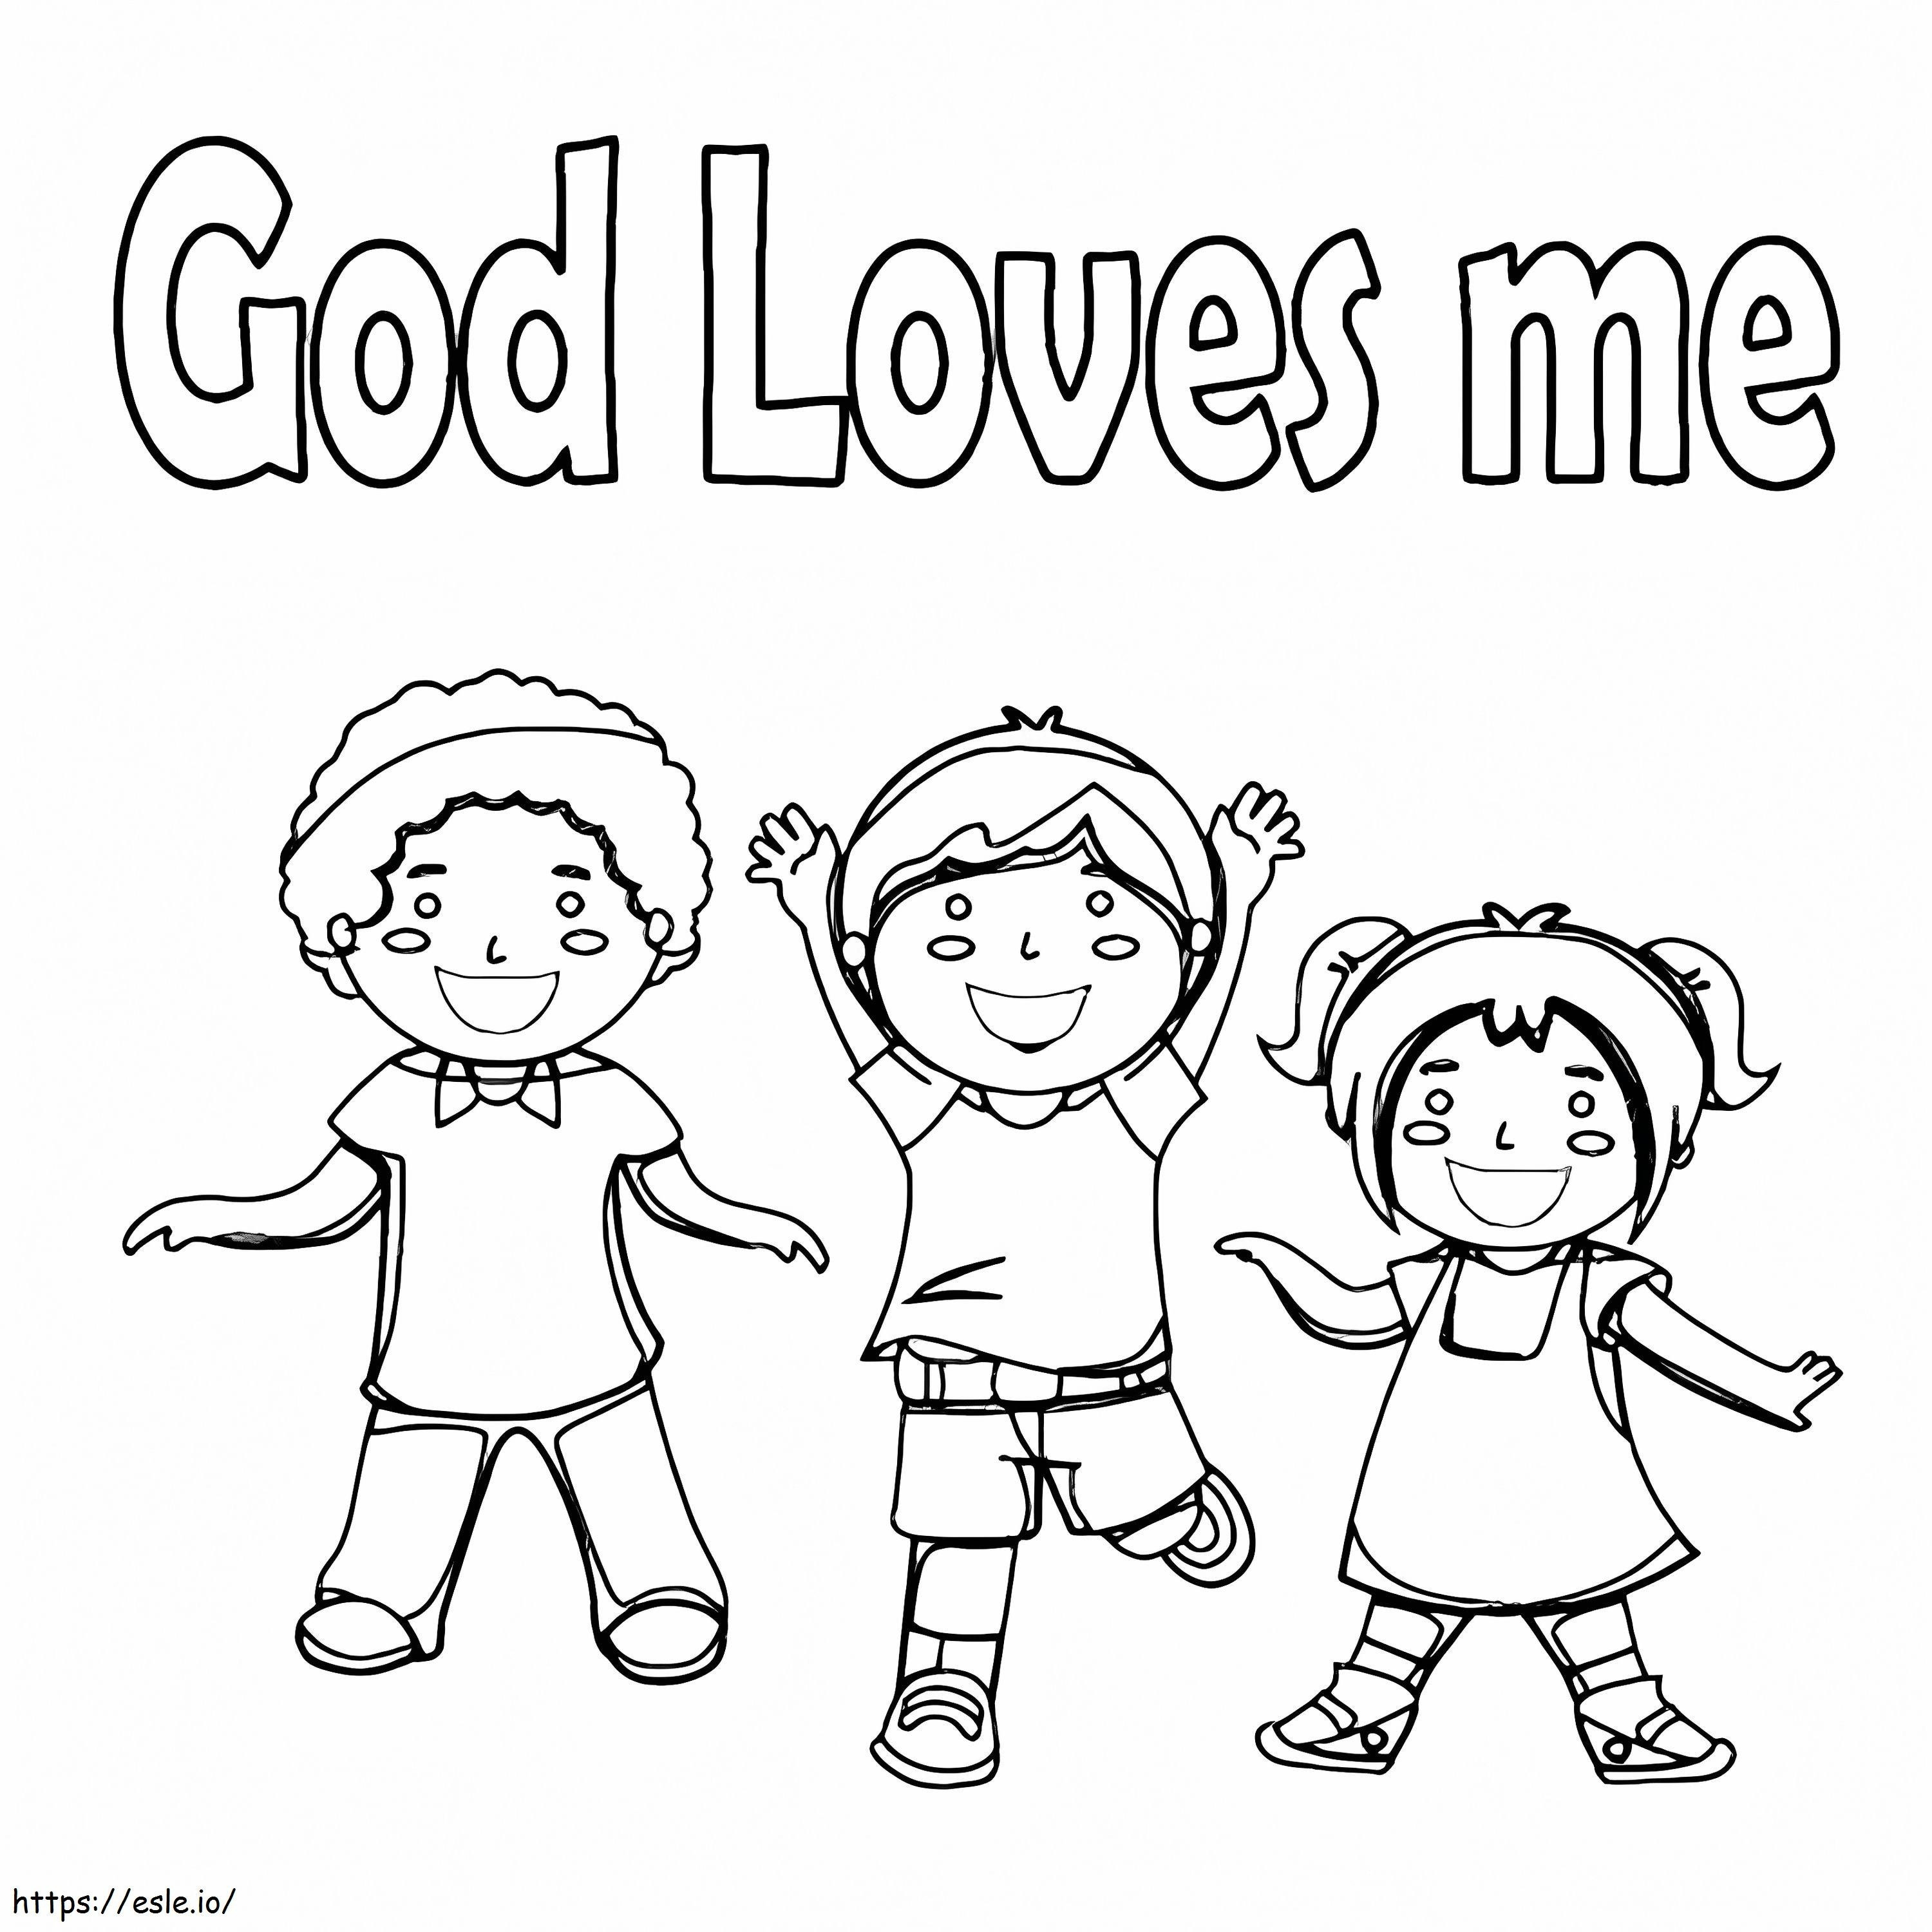 Print God Loves Me coloring page